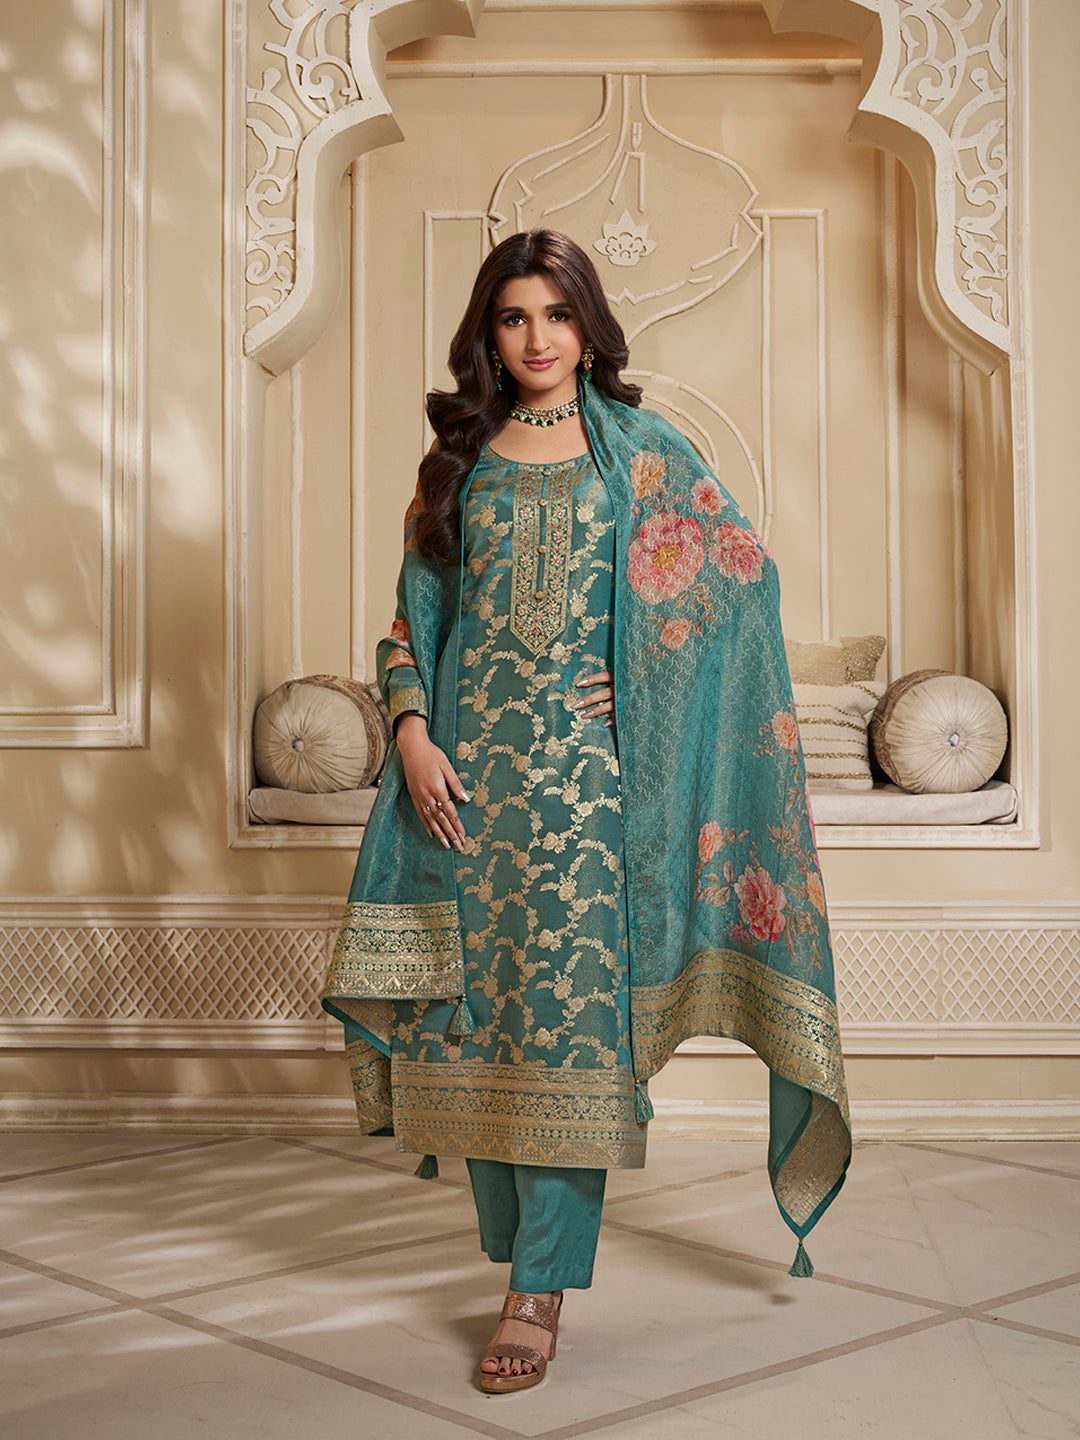 Teal Green Tissue Jacquard Kurta Suit Set with Jaal Pattern & Hand made Buttons Product vendor